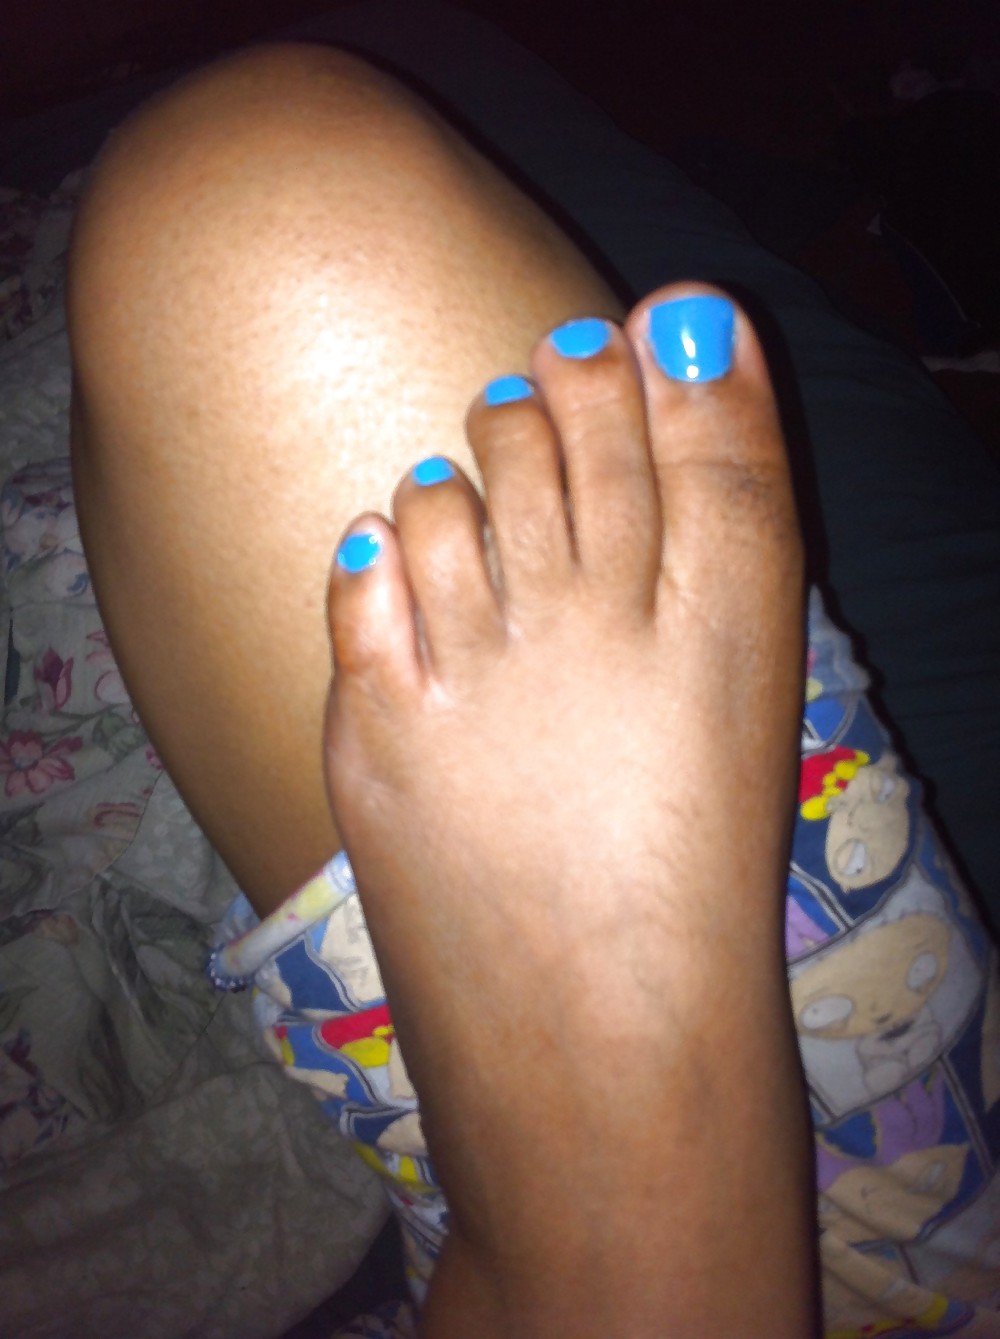 XXX New Blue Painted Toes from a Freind